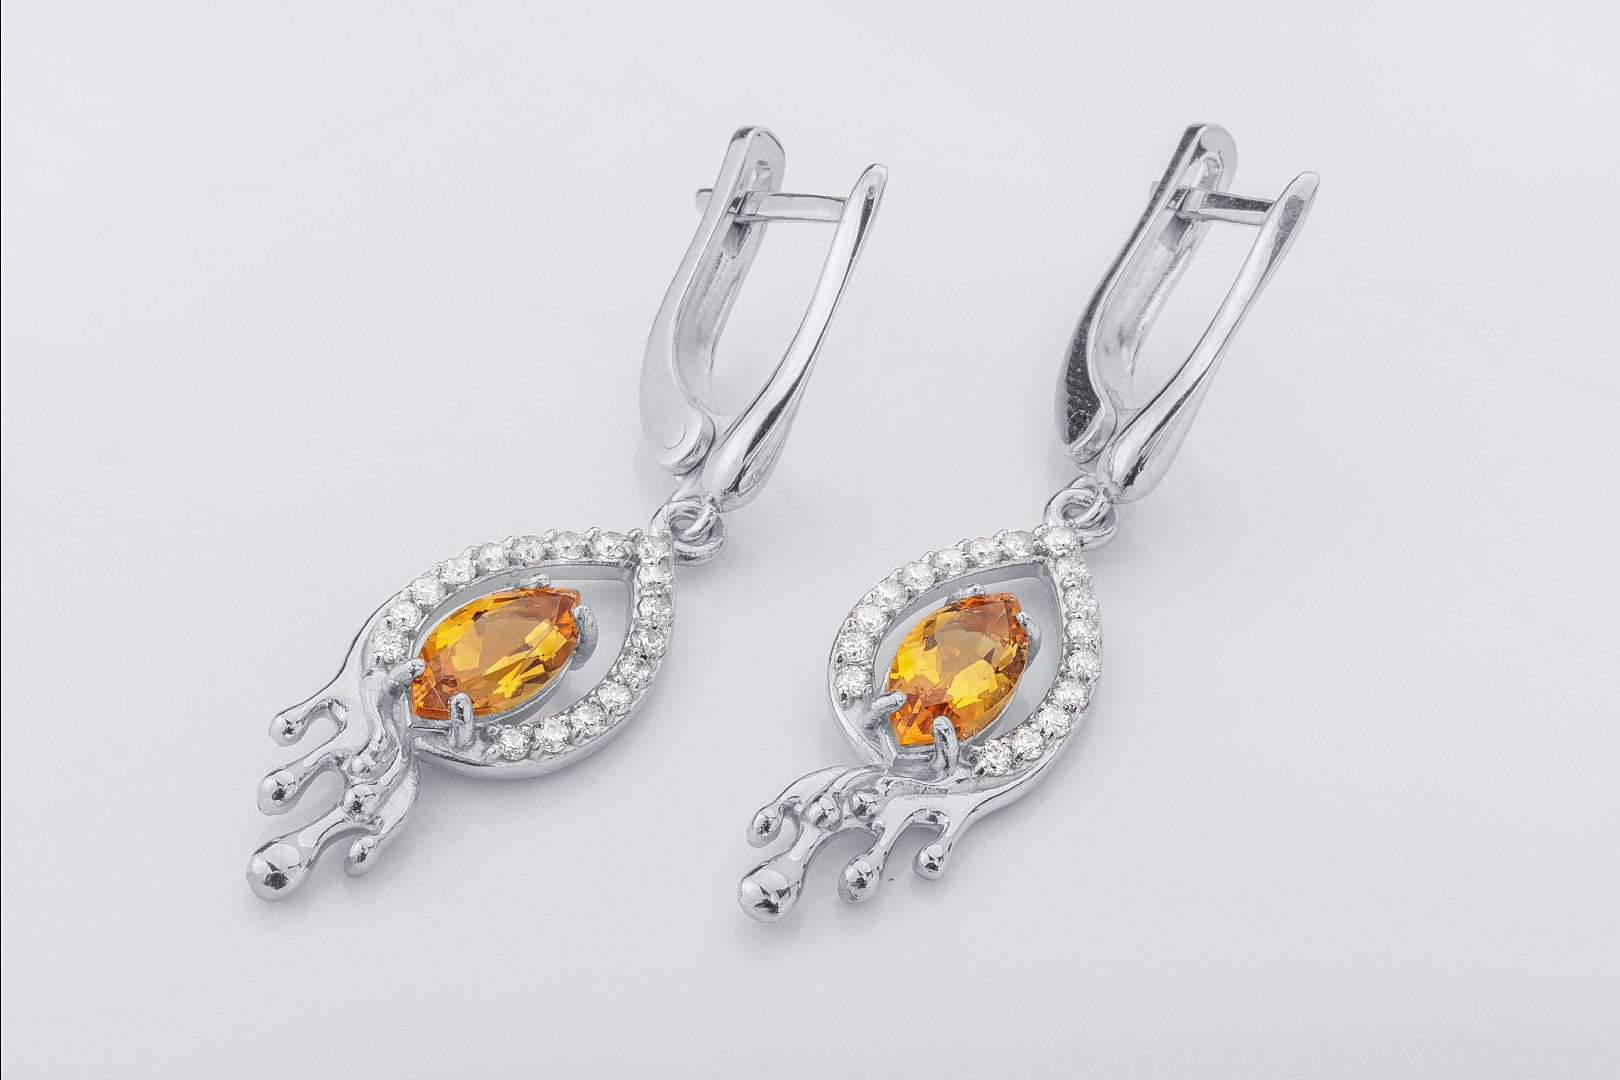 Citrine Candle Flame Earrings, Rhodium plated 925 silver